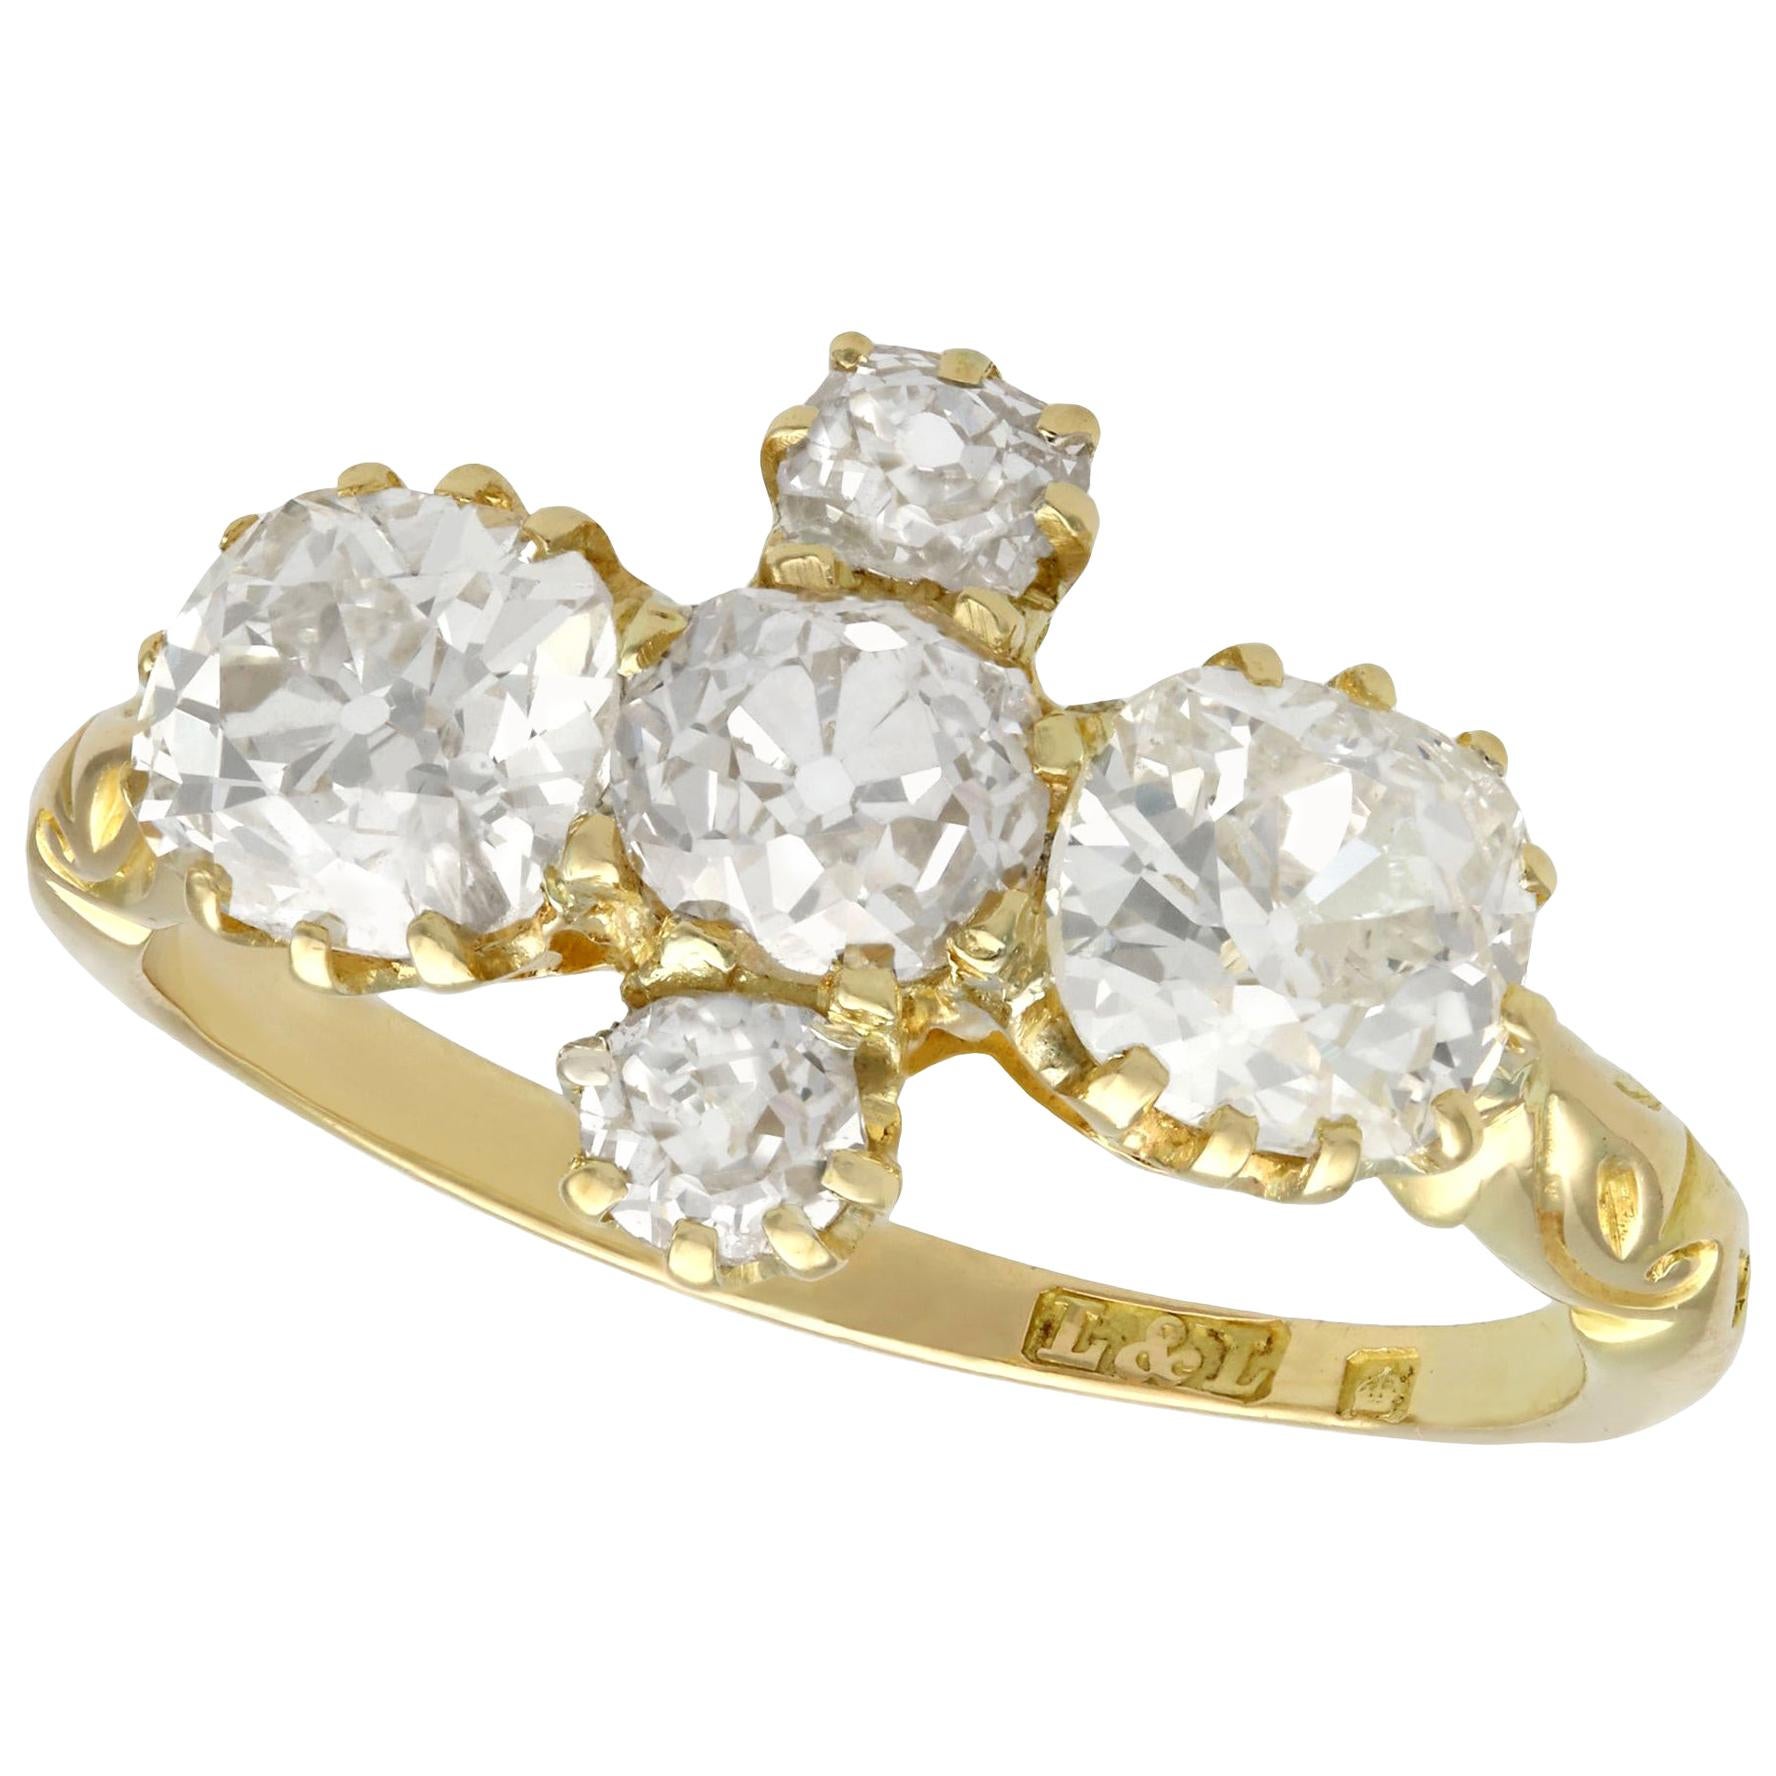 Antique Victorian Diamond and Yellow Gold Engagement Ring, Circa 1890